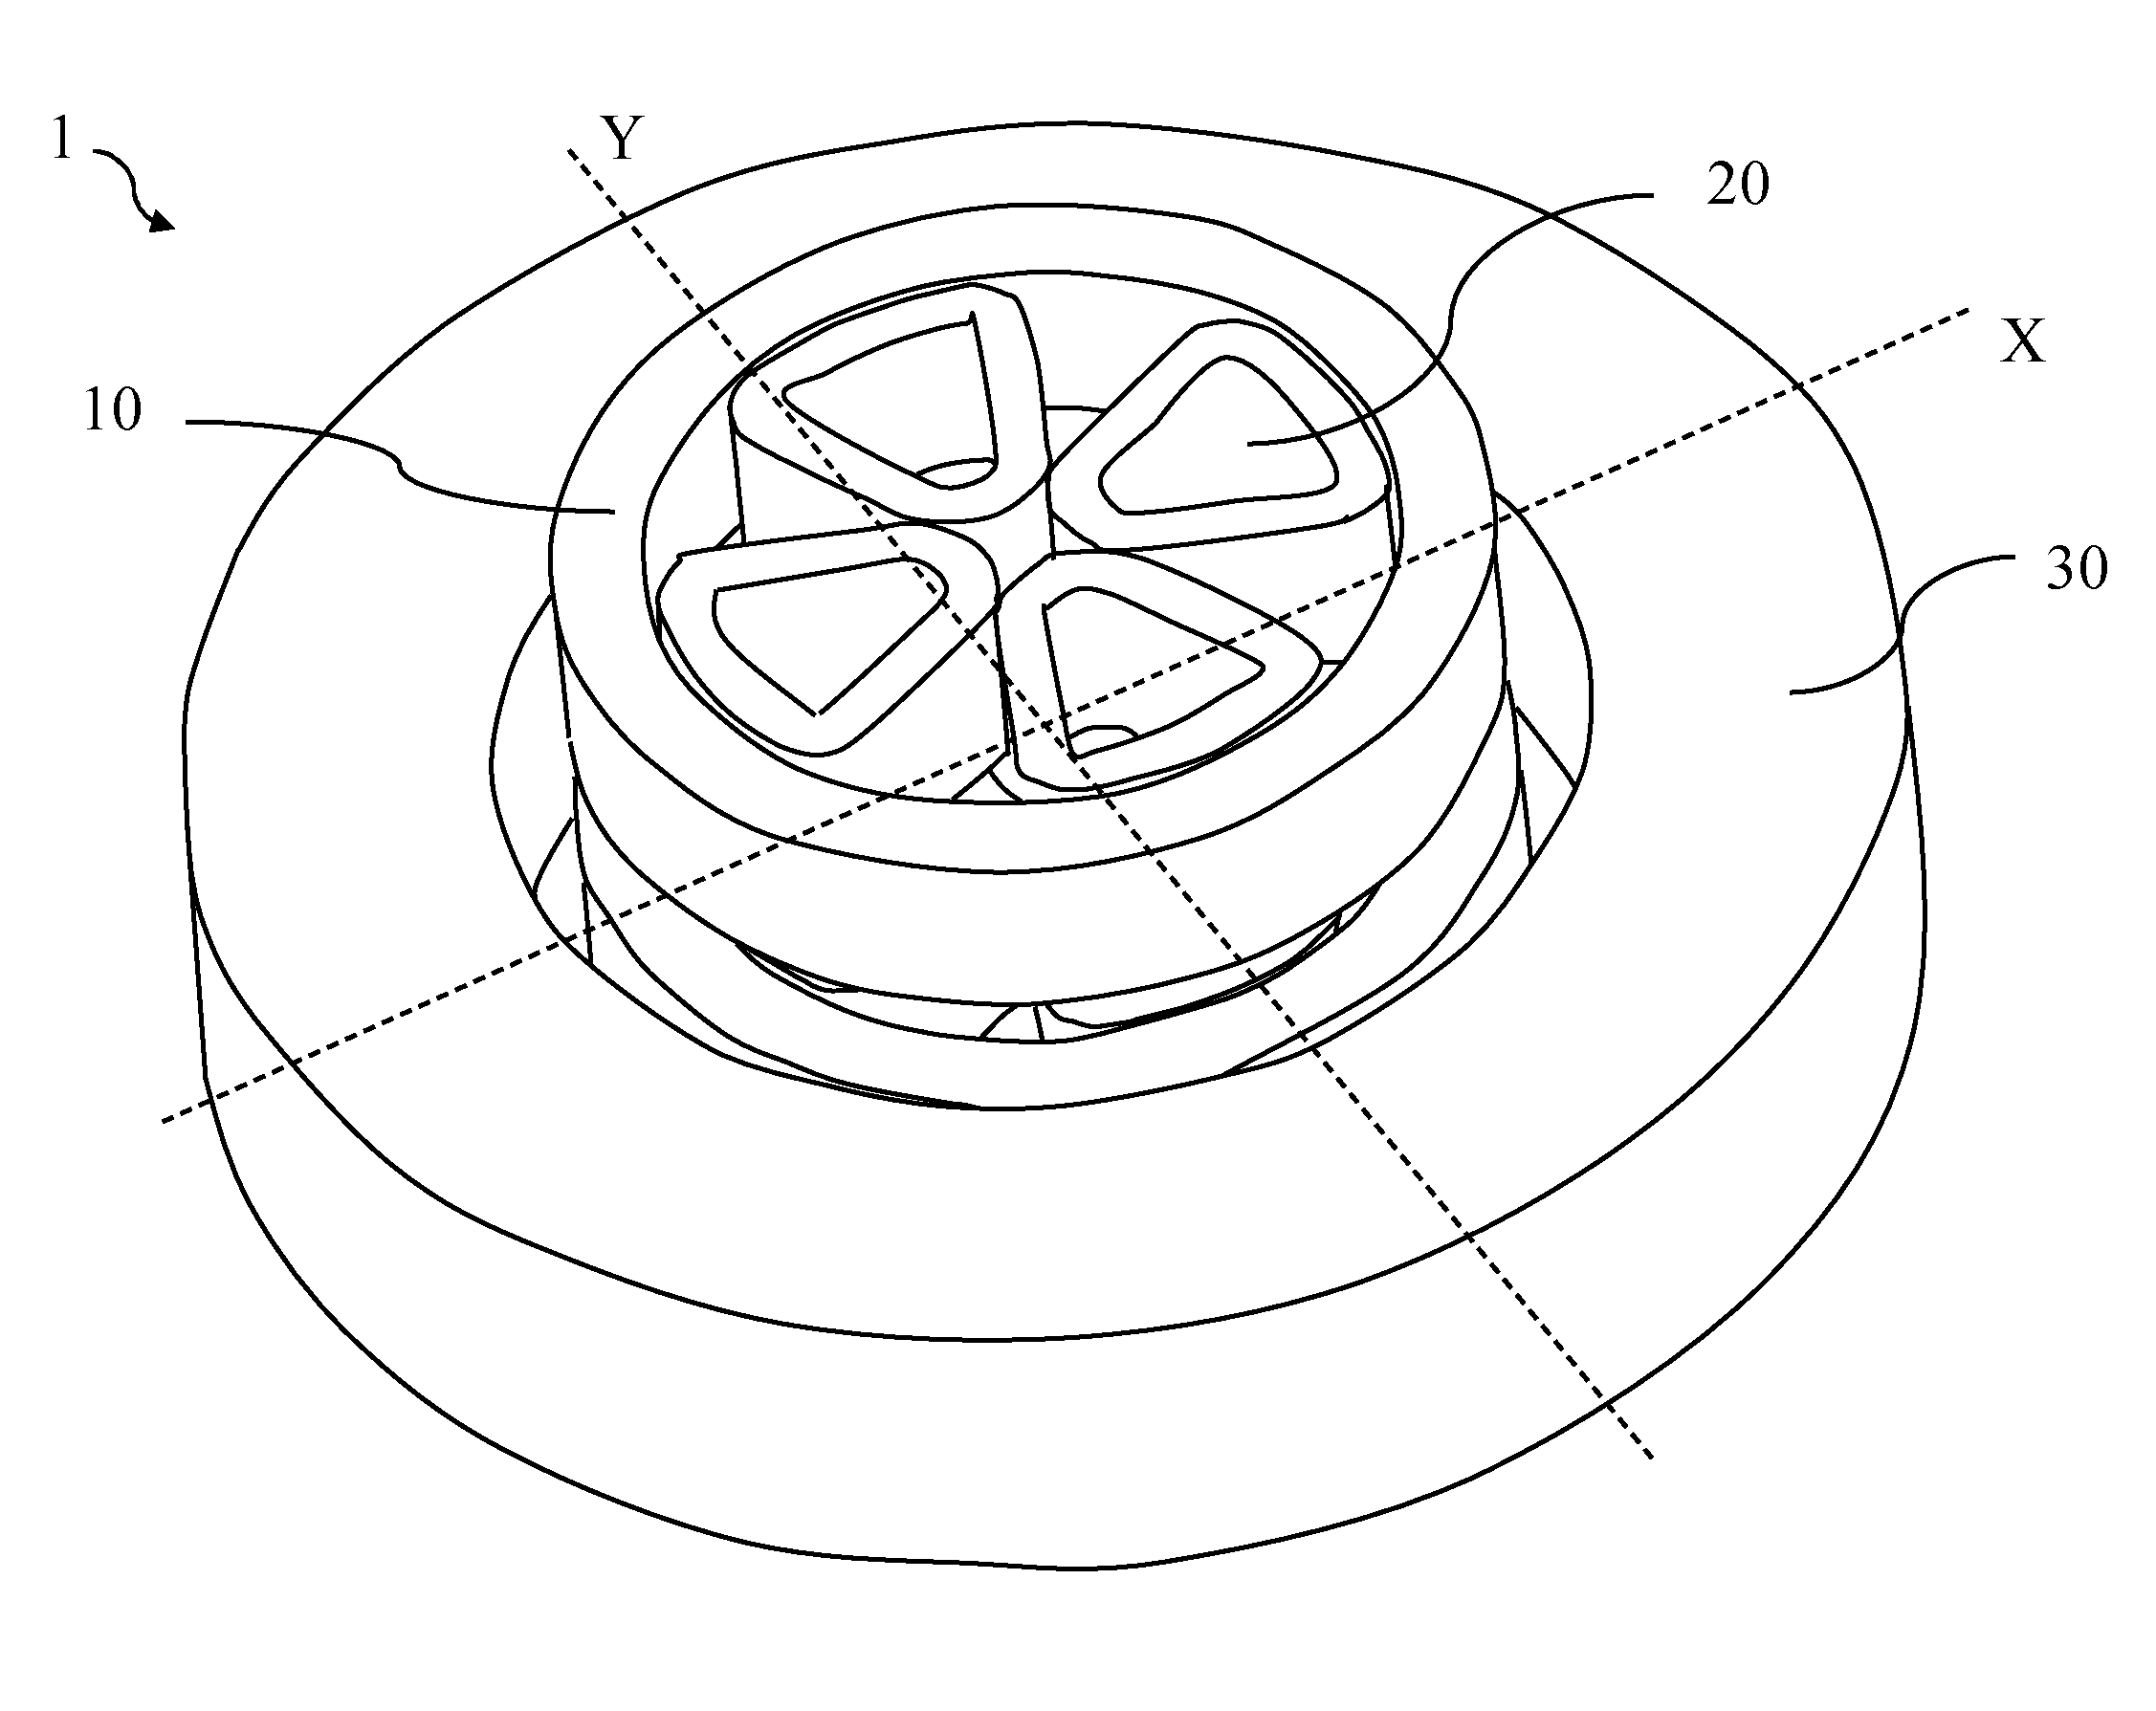 Magnet structure for an isochronous superconducting compact cyclotron